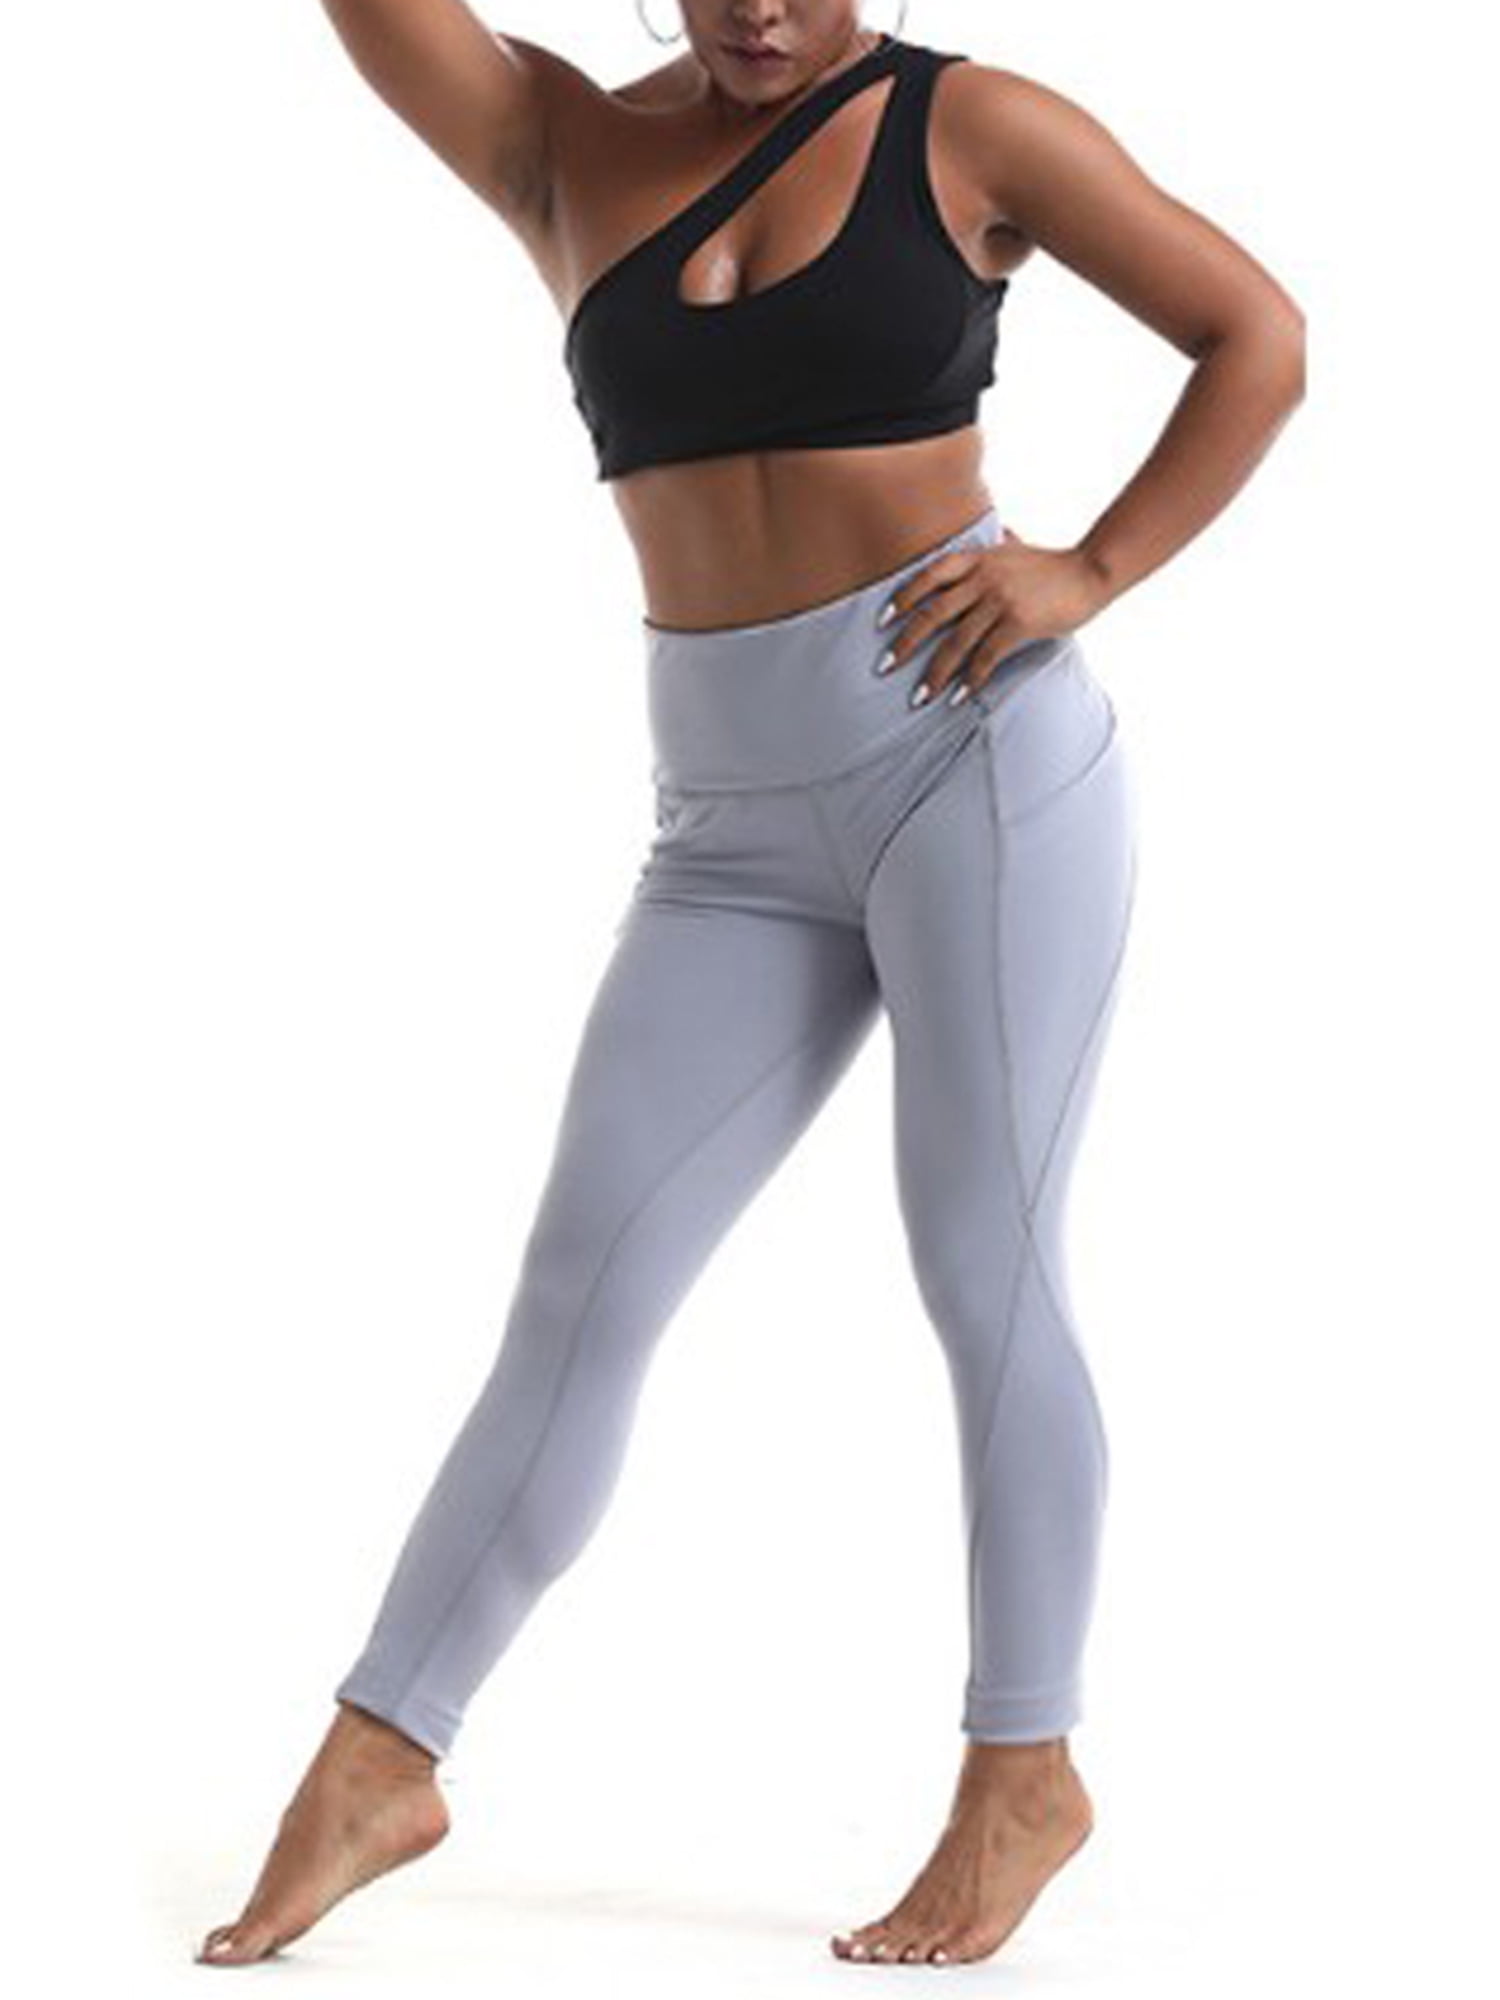 Details about   Women Jogging Fitness Yoga Stretch High Waist Leggings Pants Sports Gym Trousers 